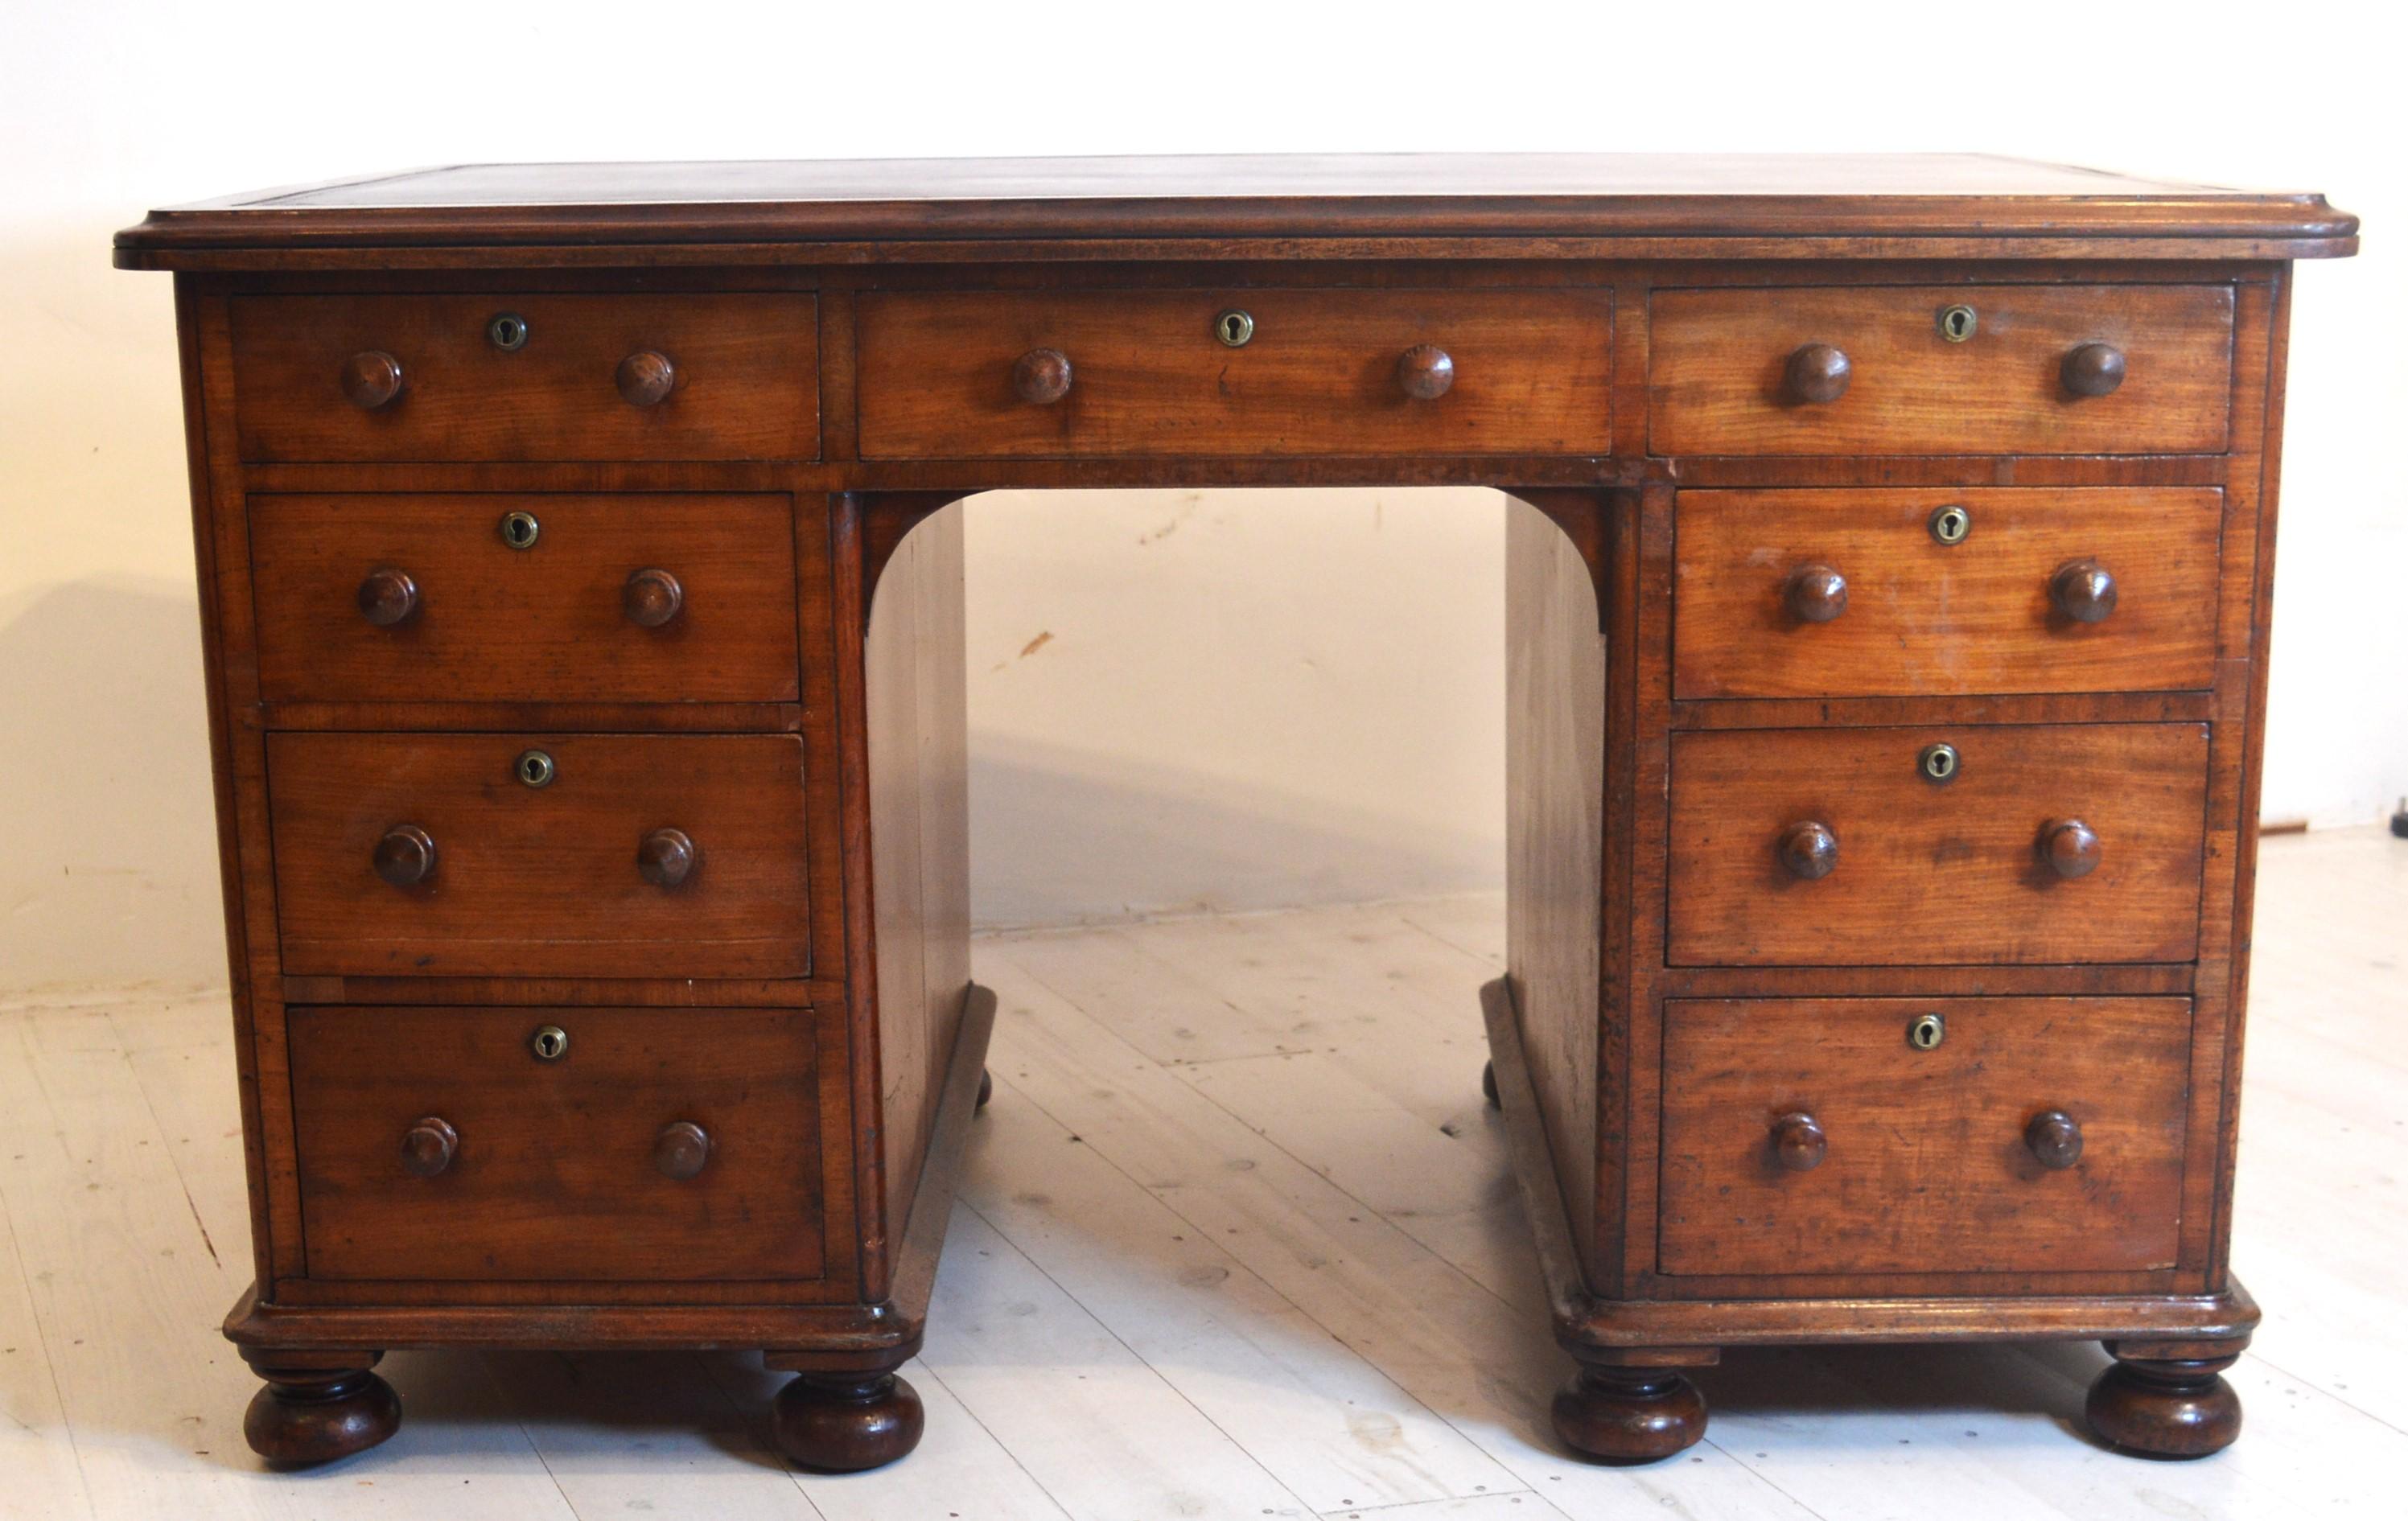 Here we have a very good quality pedestal desk not the usual work type this is constructed as a one piece desk in mahogany. It has a back with mock drawers, a repeat of the front.
It also has turned mahogany knobs all original to the desk this is